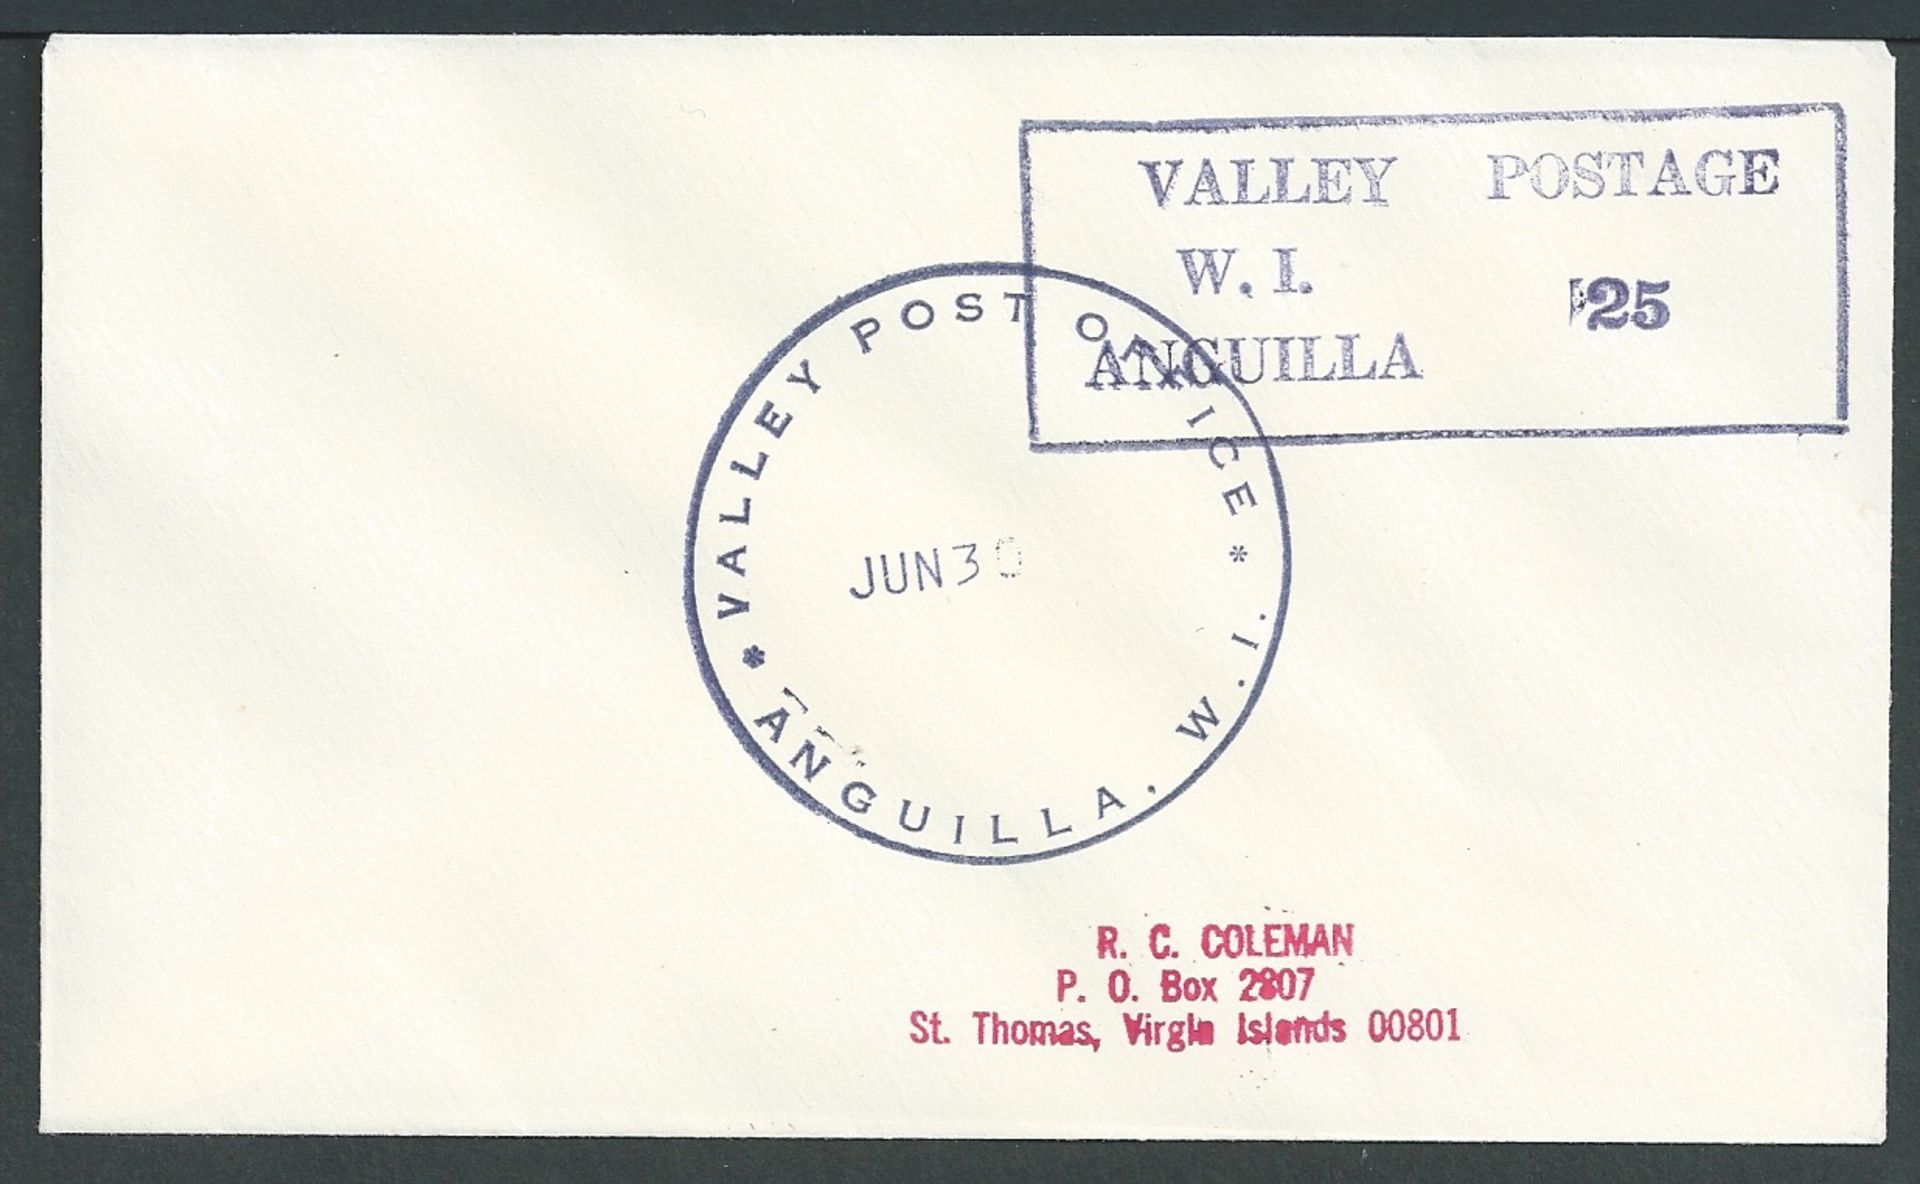 Anguilla 1968 Covers to the U.S. Virgin Island with boxed "VALLEY POSTAGE/W.I./ANGUILLA"